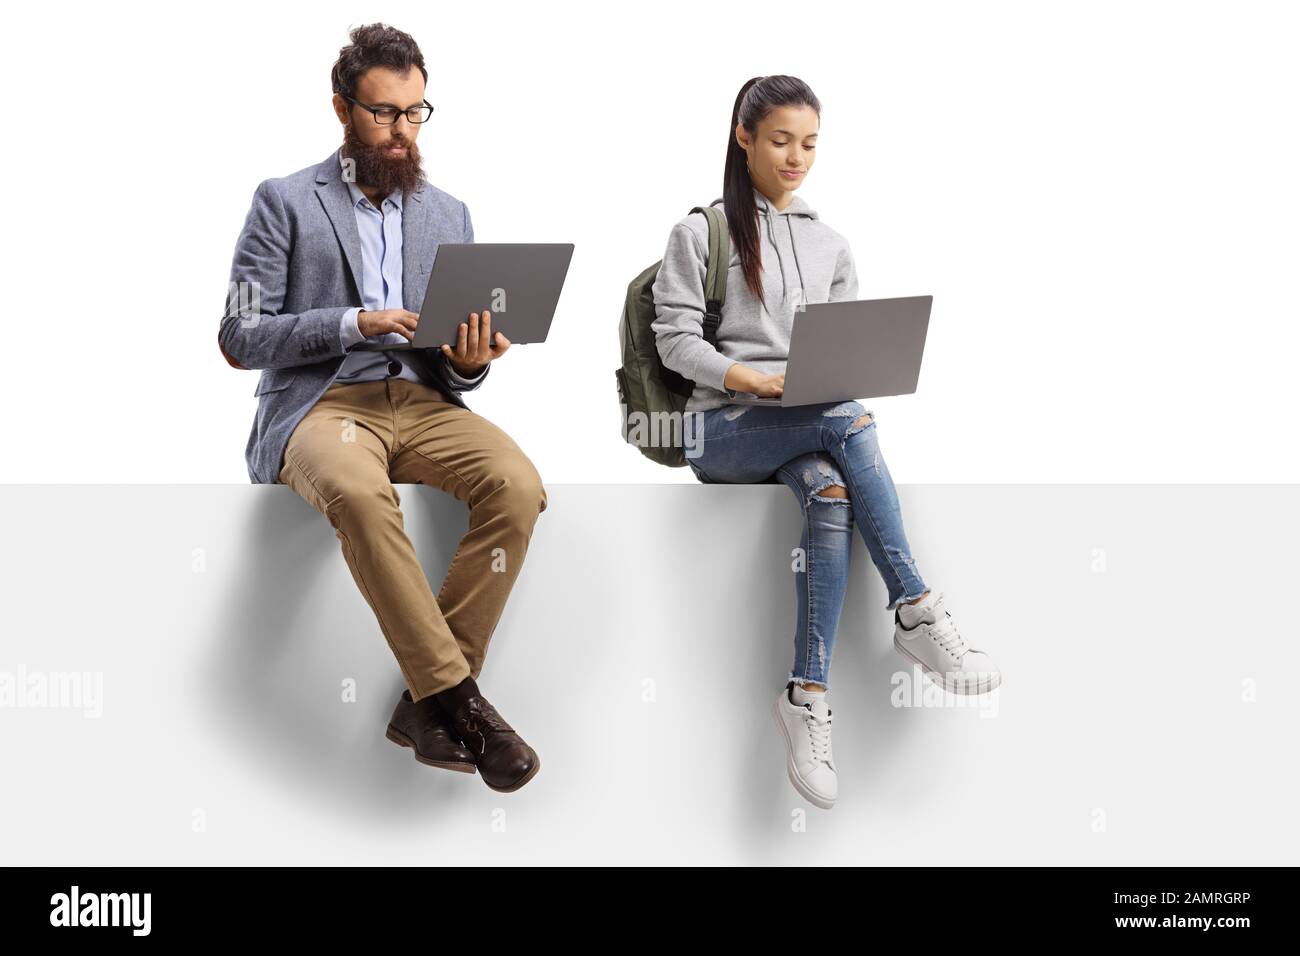 Male teacher and a female student with laptop computers sitting on a panel isolated on white background Stock Photo